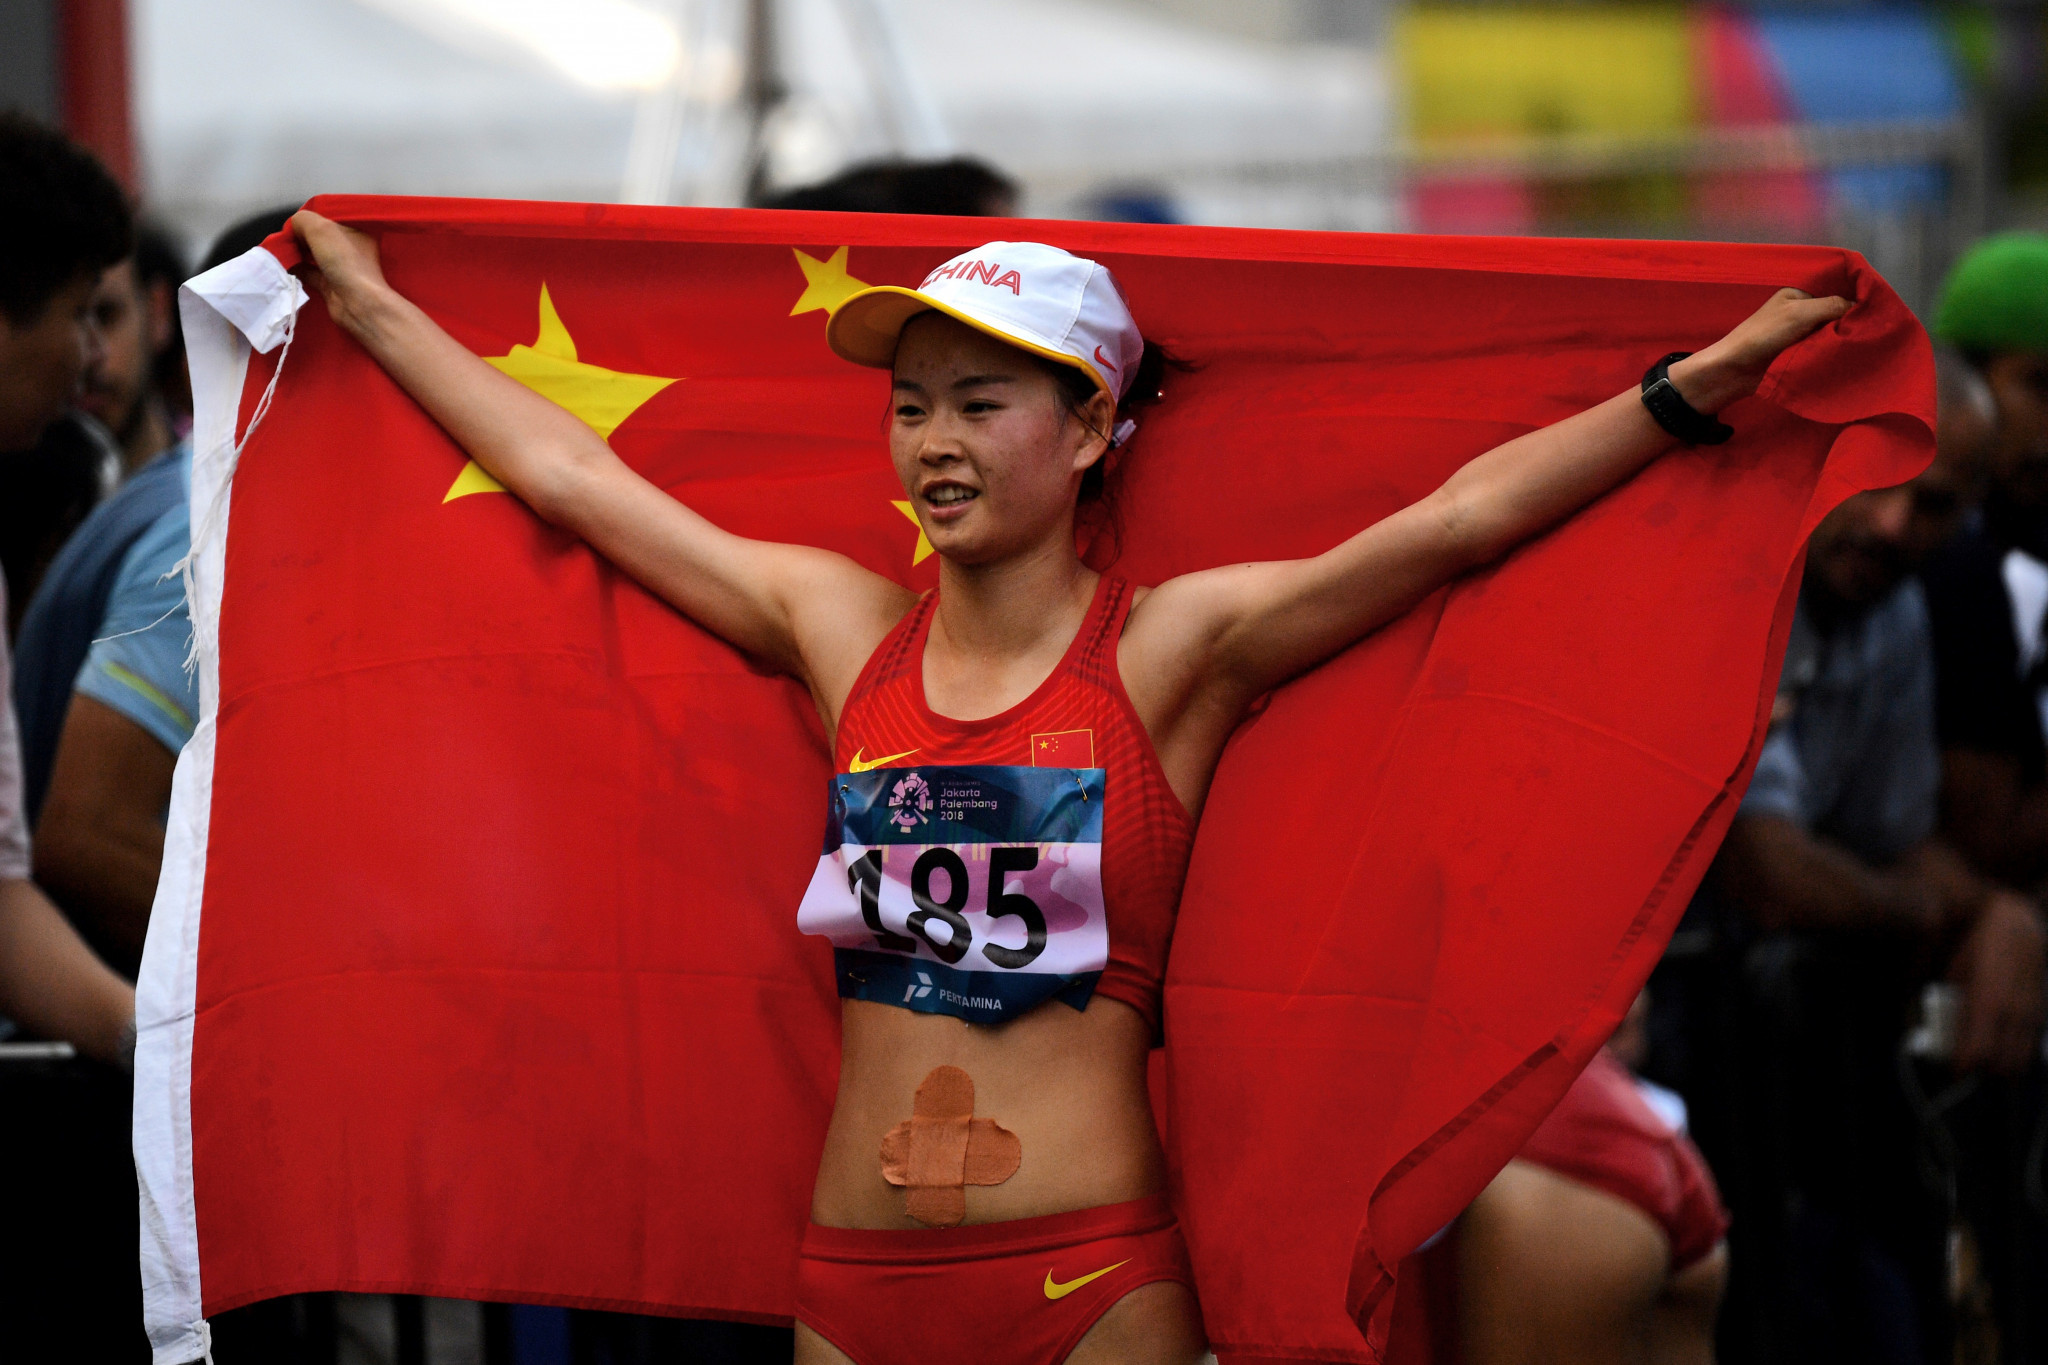 Yang Jiayu is set to be the first woman to dip below the 1:24:00 in the record books ©Getty Images